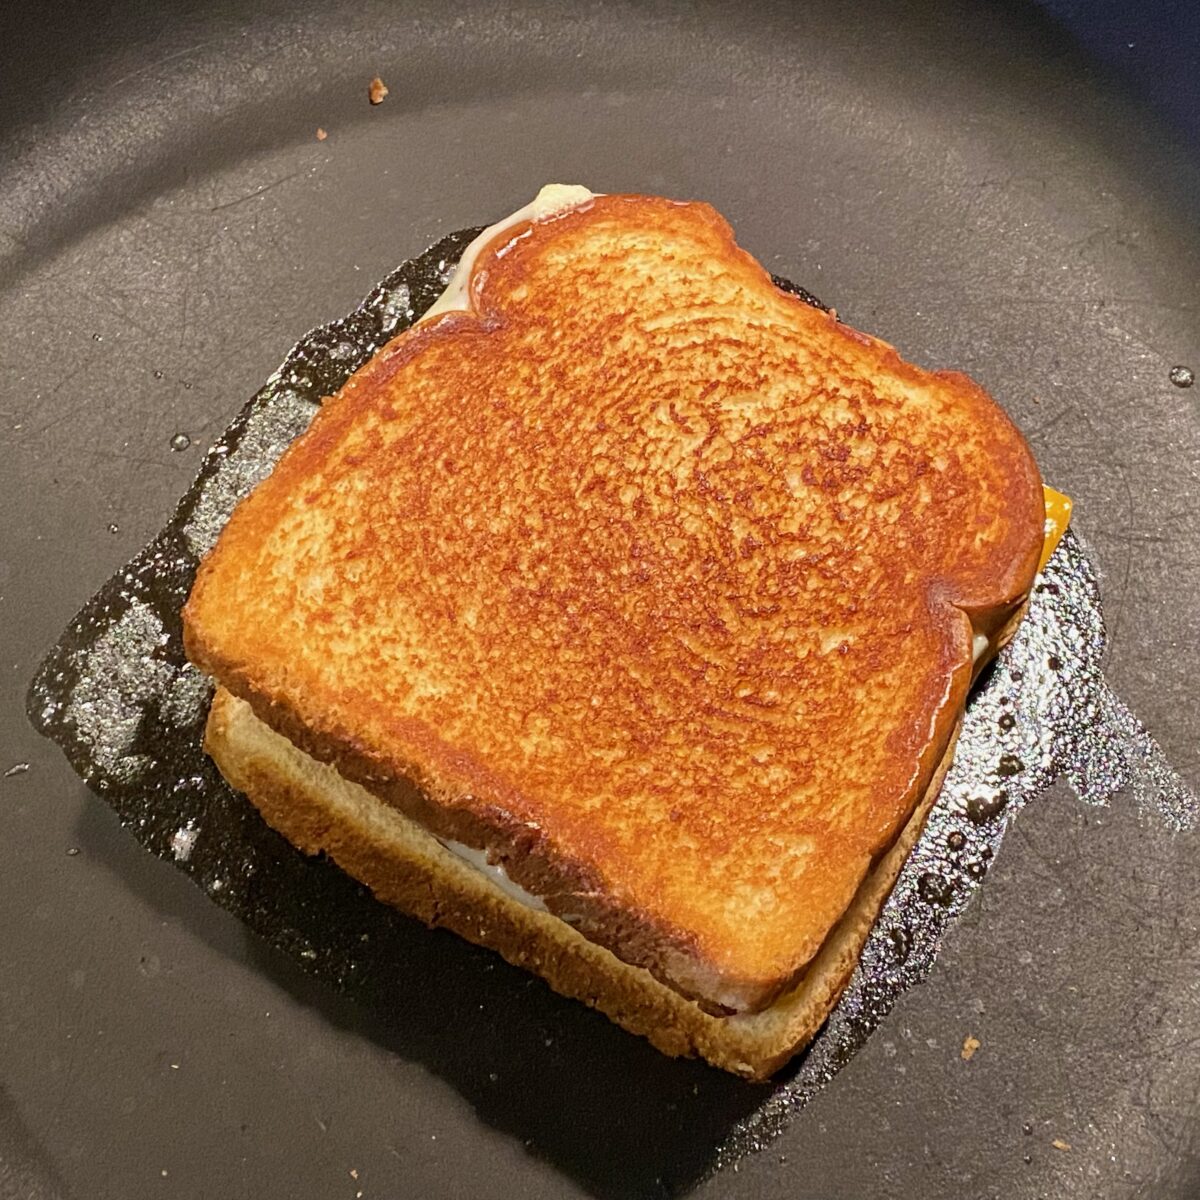 A grilled cheese sandwich made with Texas toast, with one side perfectly brown and crisp. The other side is browning up in melted butter.